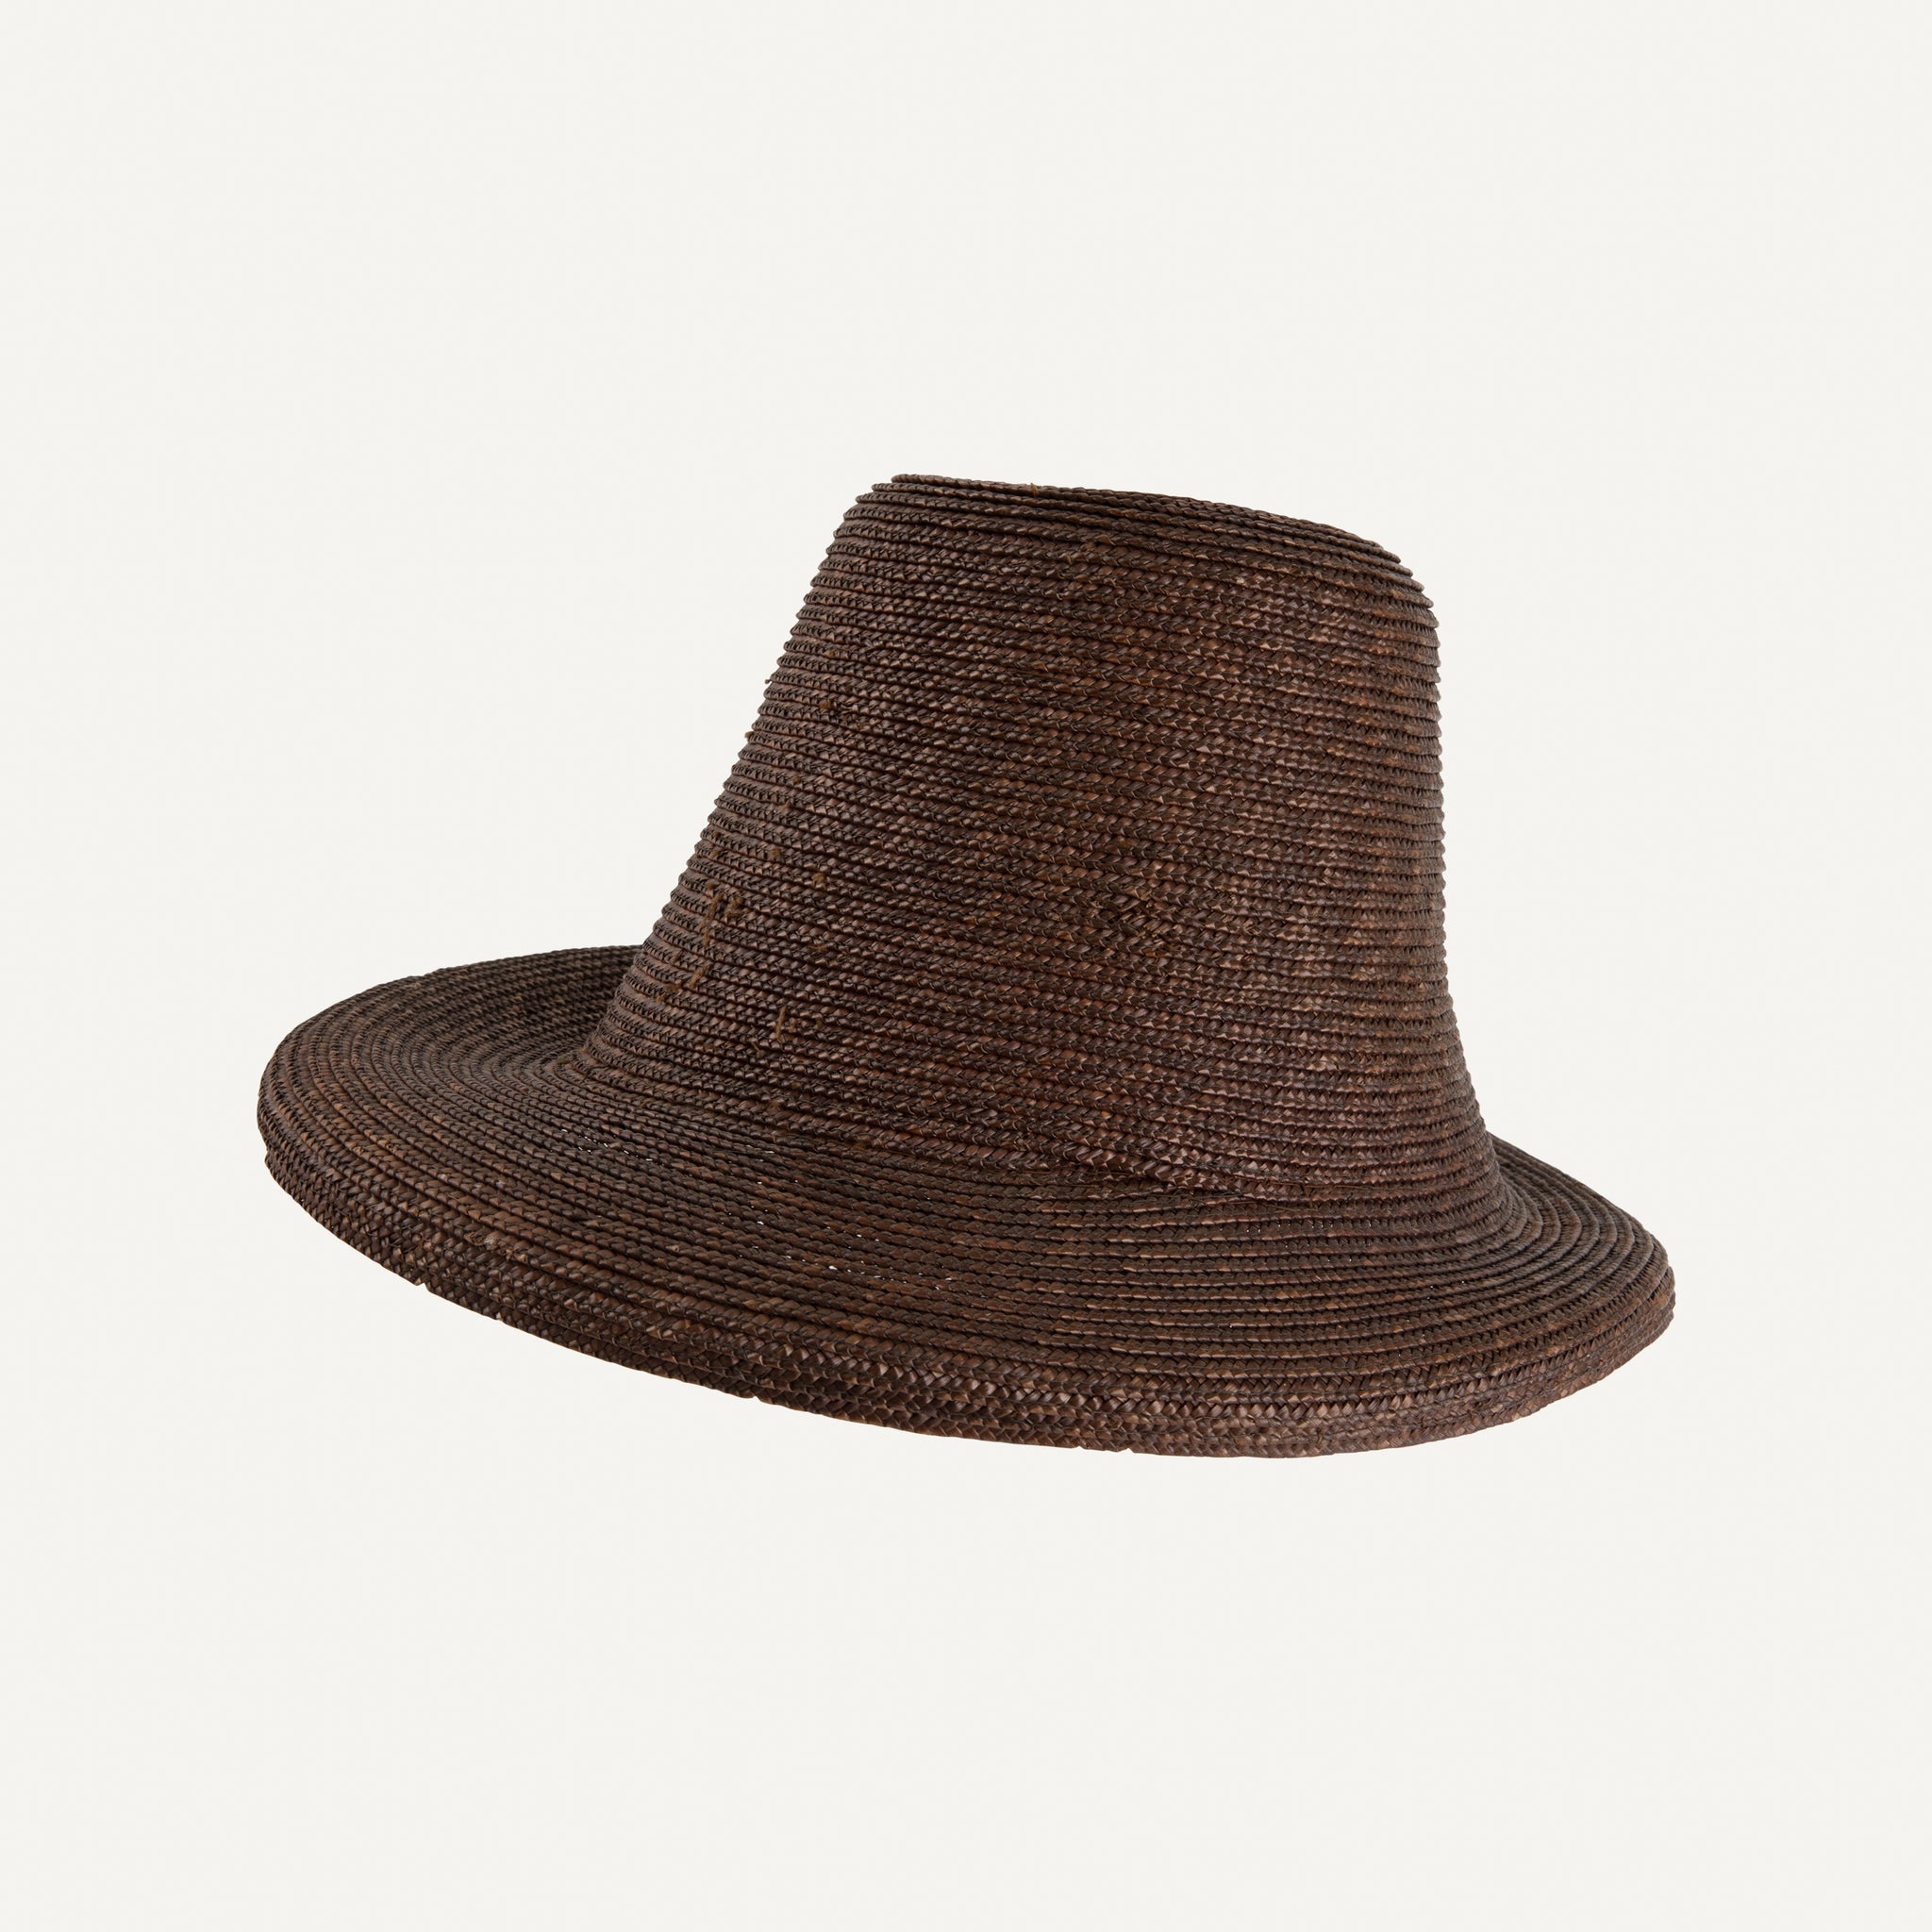 ANTIQUE EARLY STRAW HAT